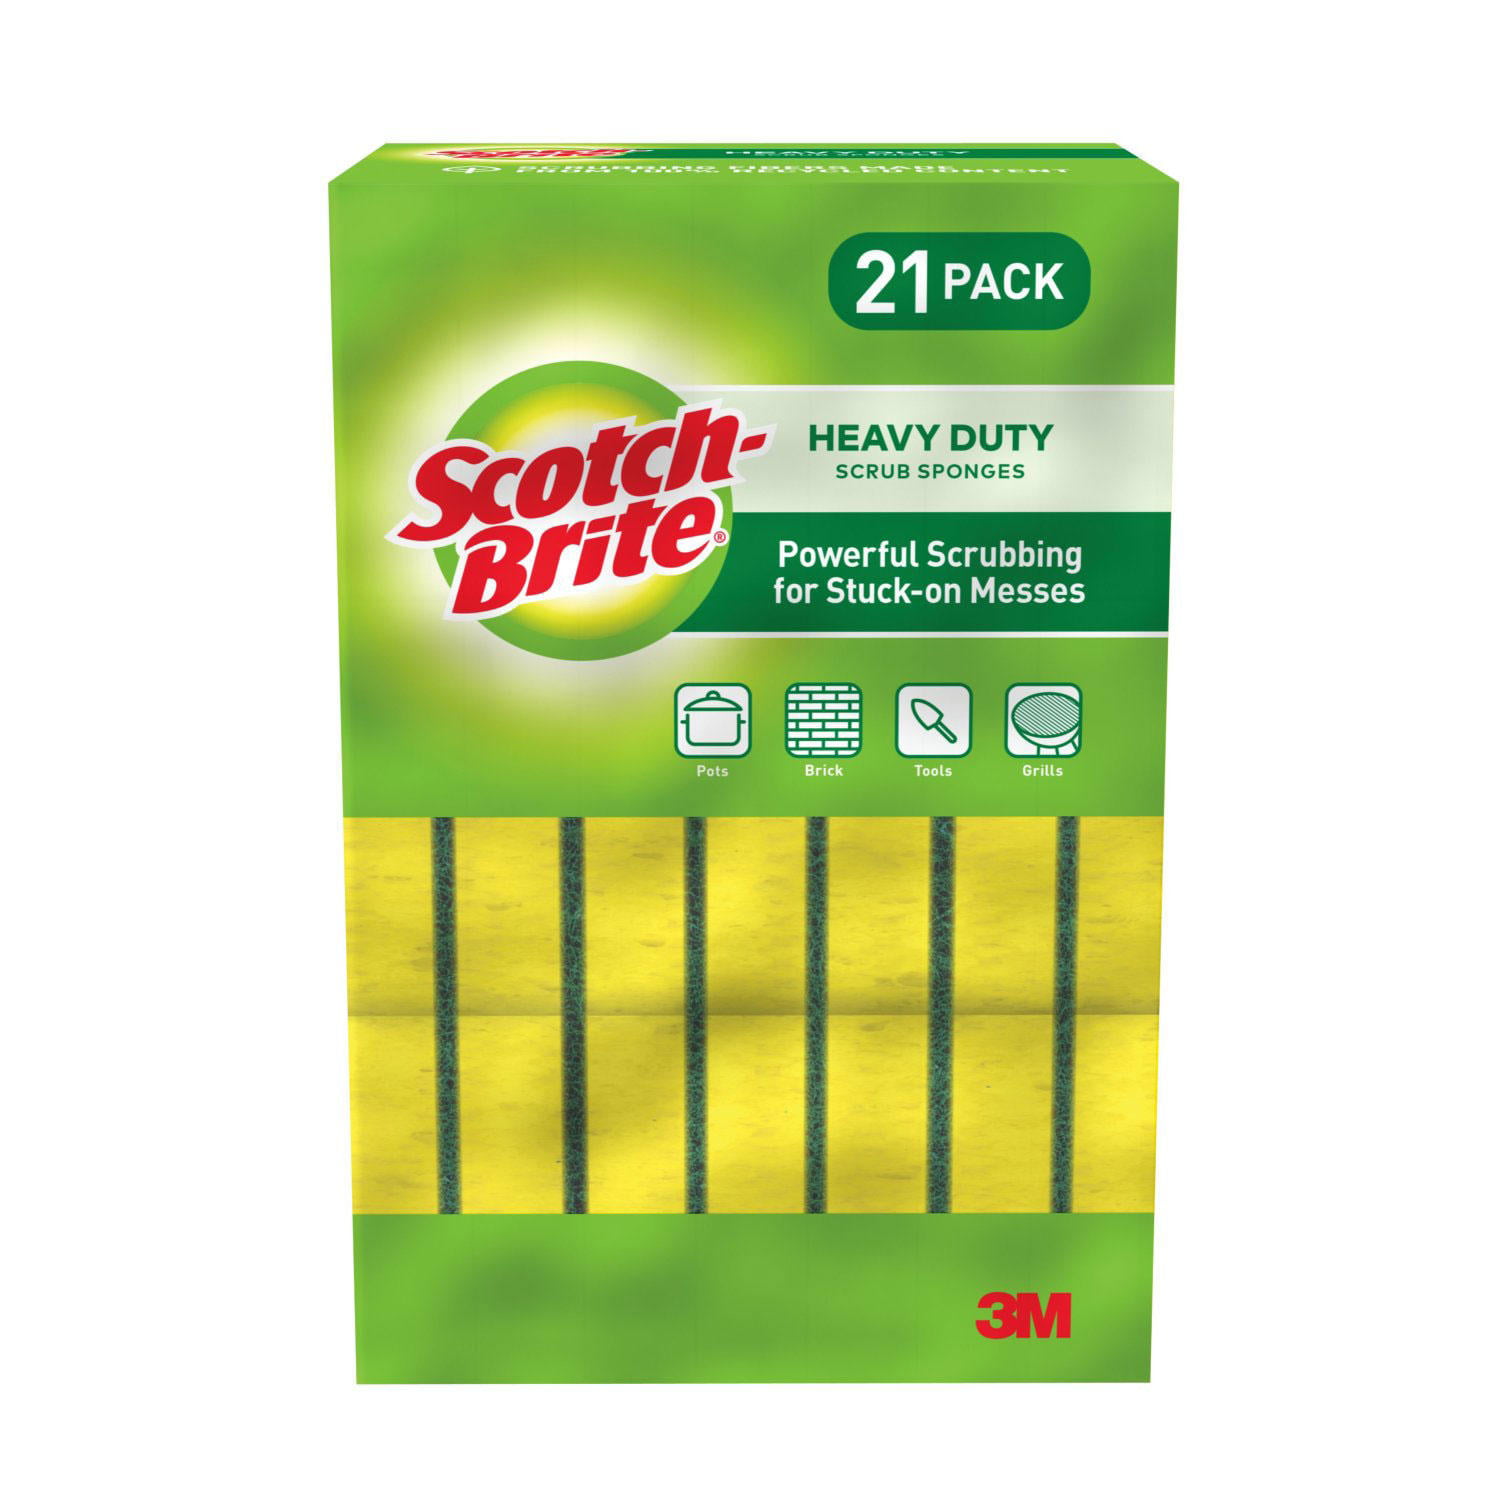 Individually wrapped 21 Count Scotch-Brite Scrub Sponges 